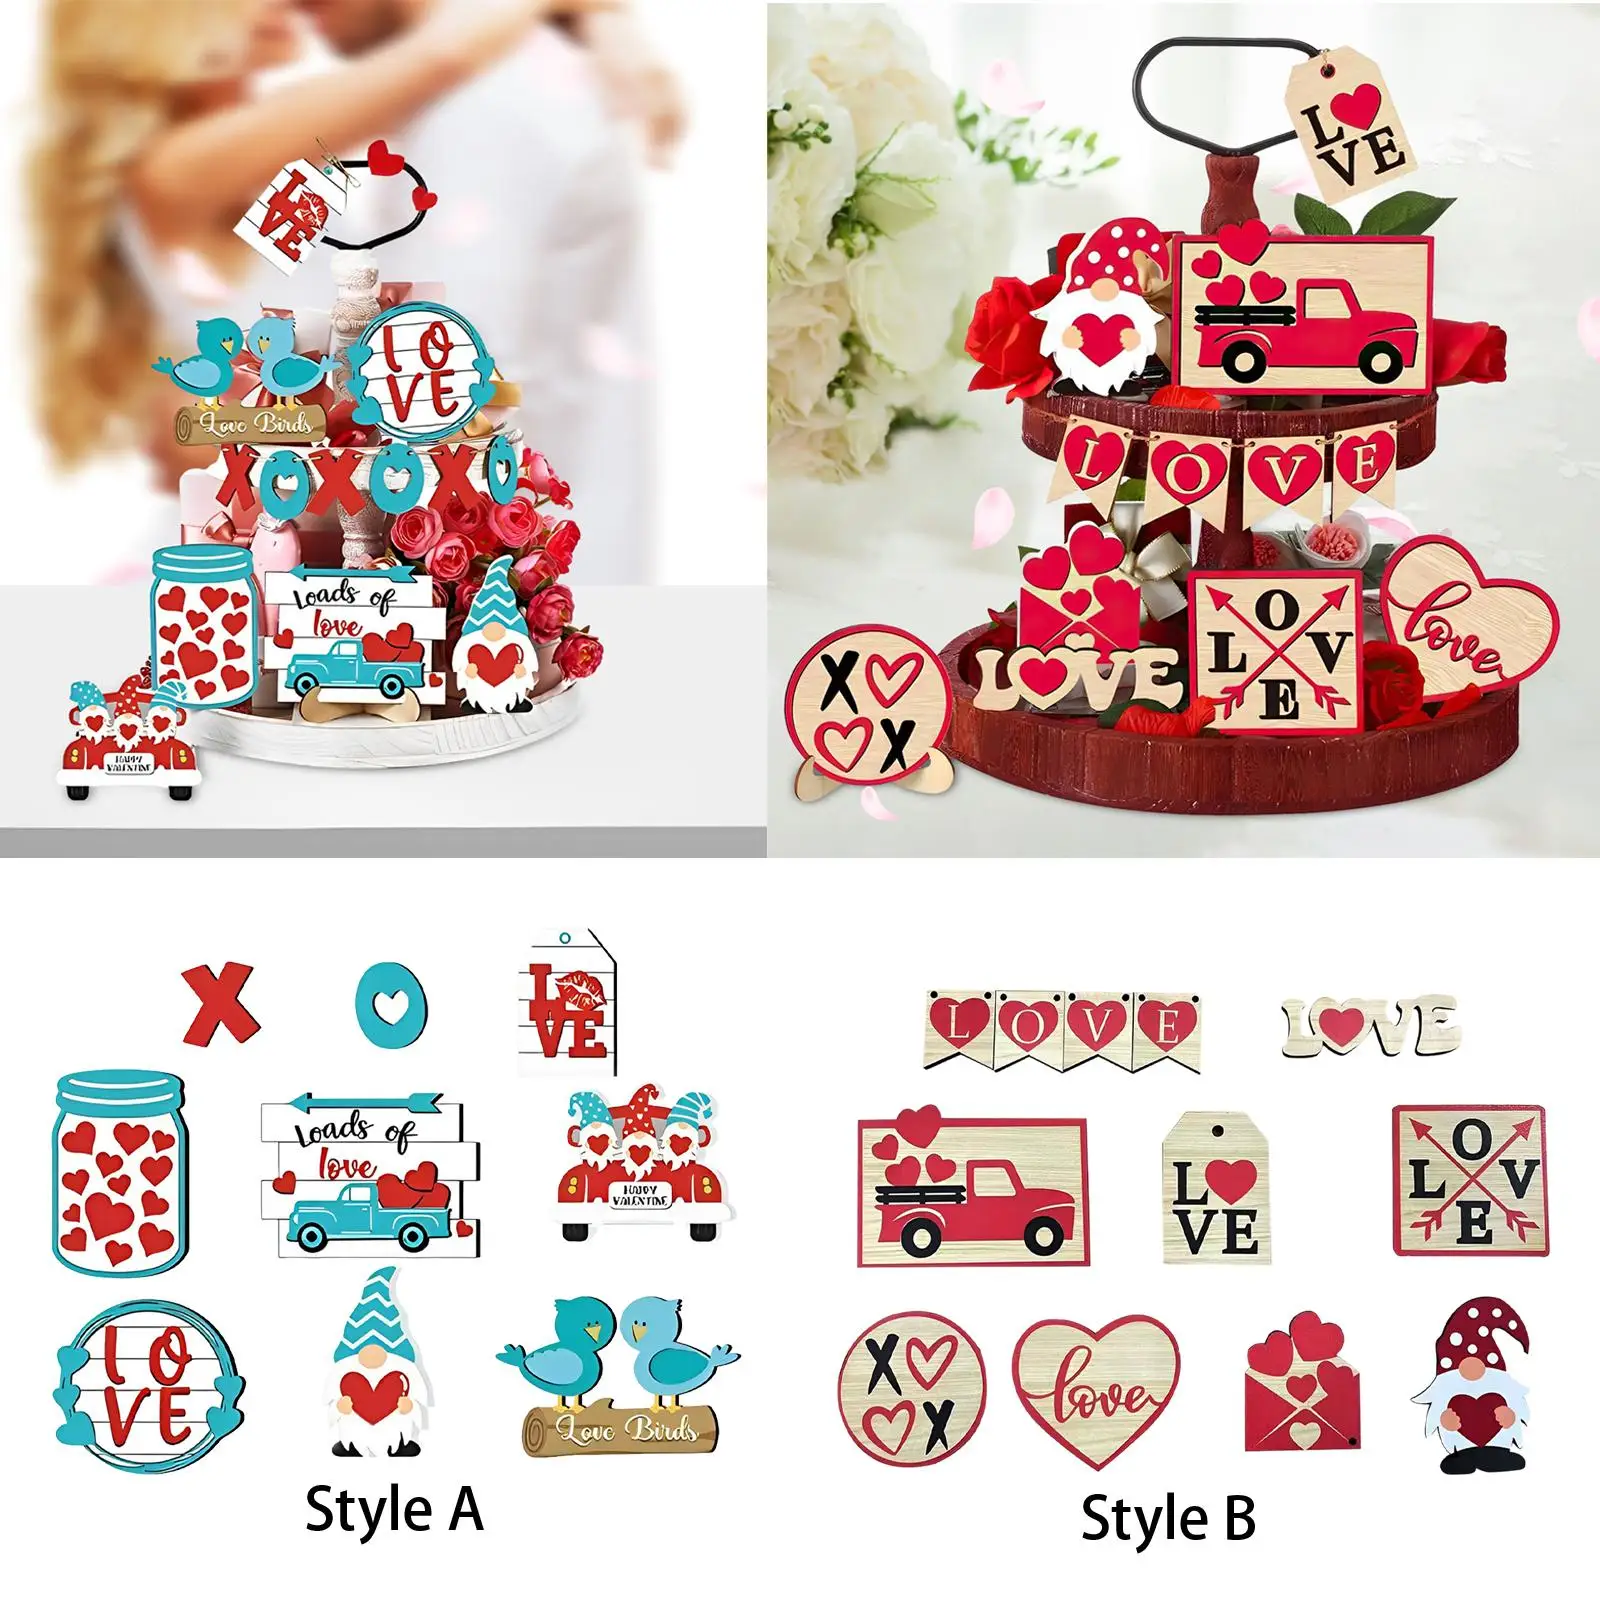 Valentine`s Day Tiered Tray Decor Valentines Day Decor Cute Layered Tray Decoration for Tabletop Engagement Holiday Wedding Home